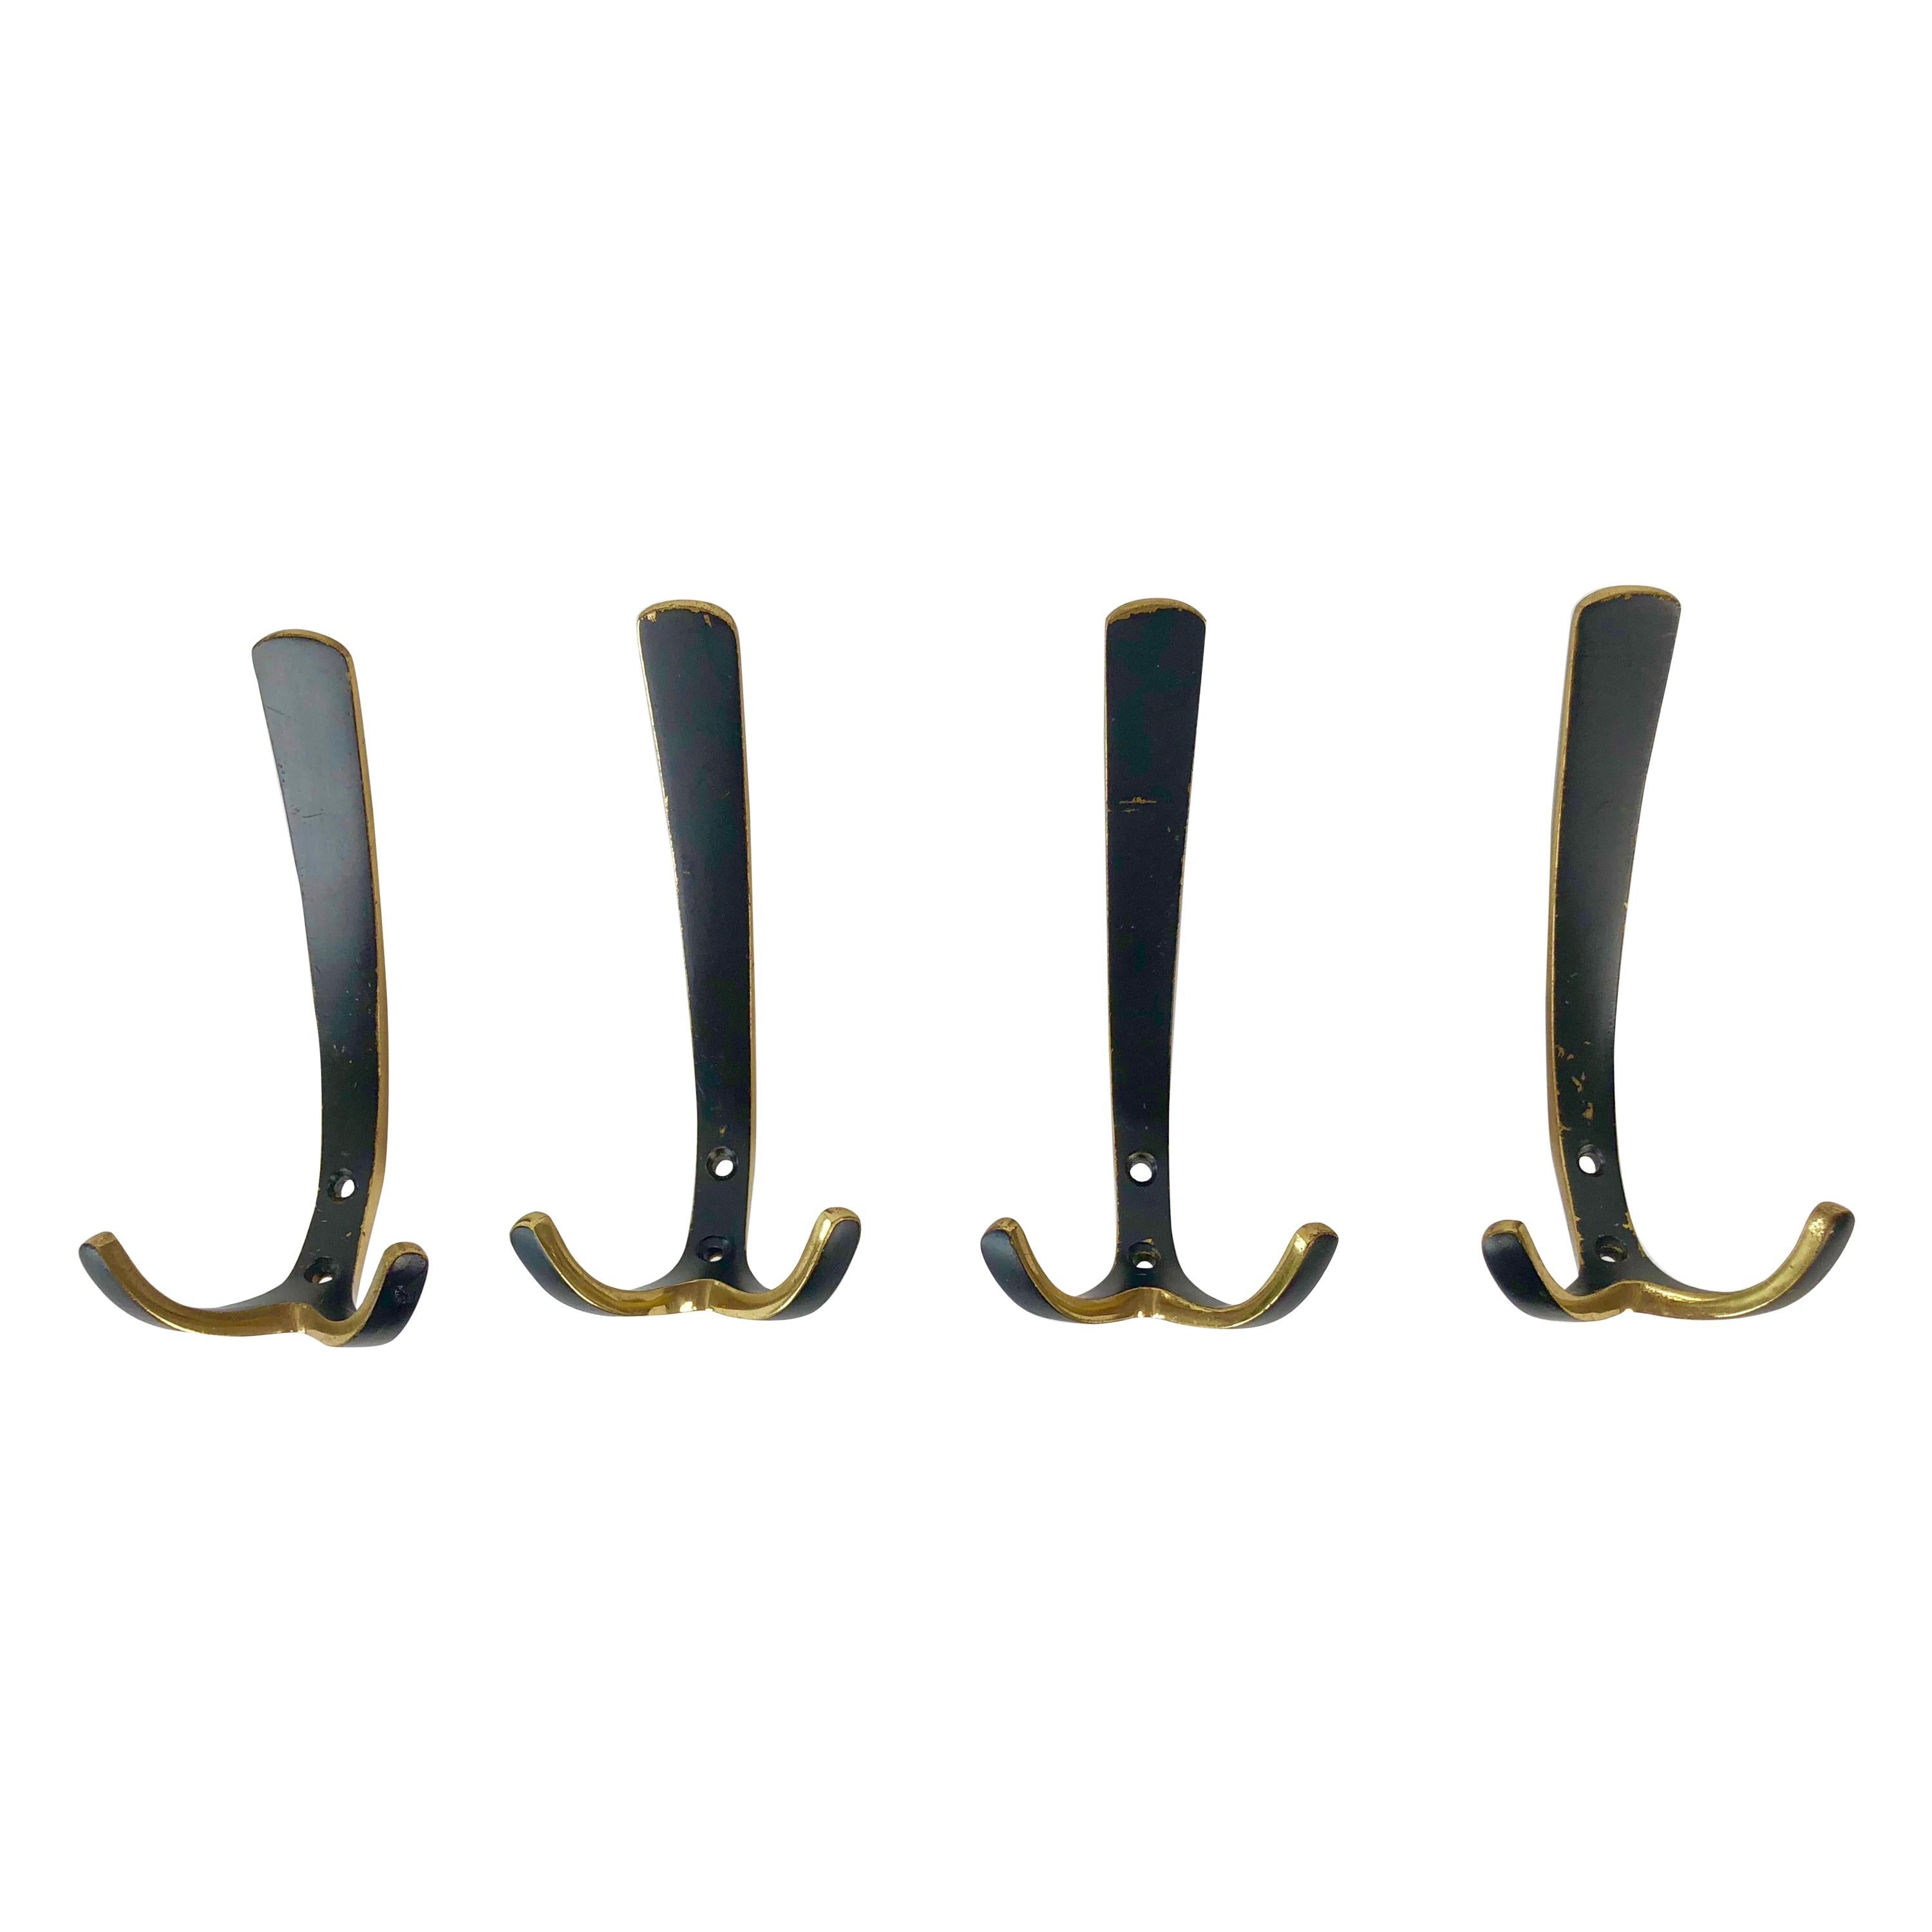 Four Wall-Mounted Brass Hooks by Hertha Baller, Austria, 1950 For Sale